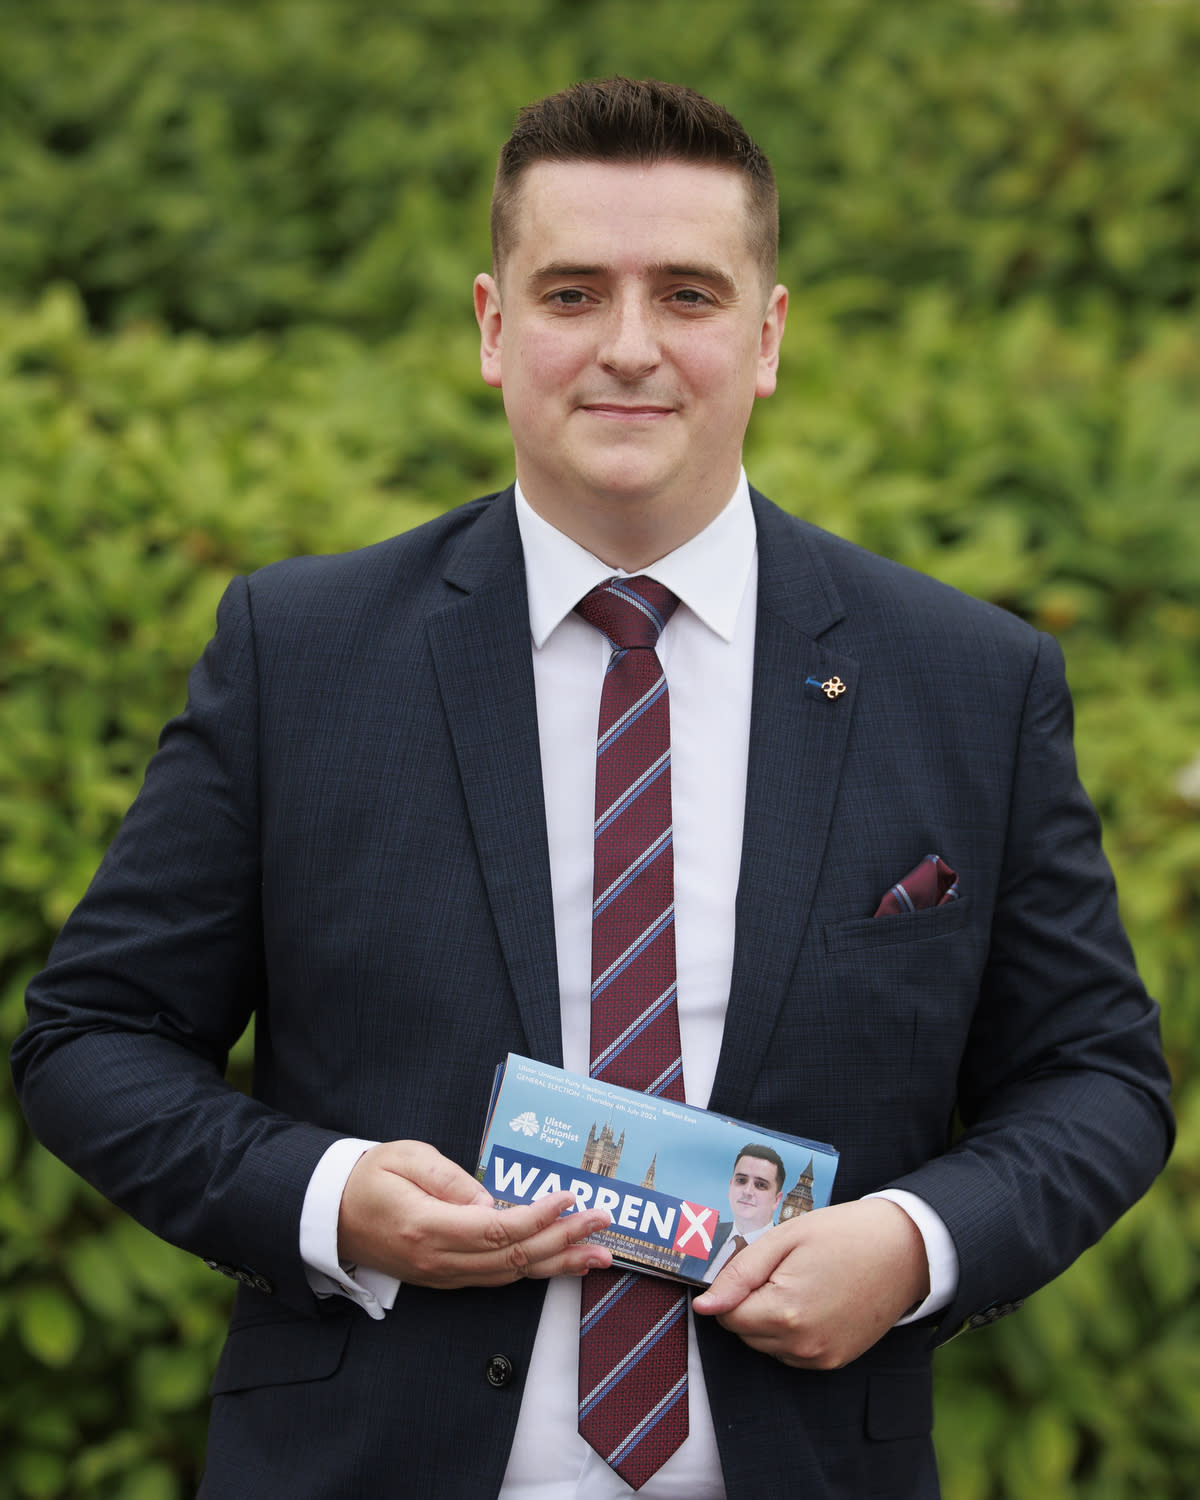 UUP candidate Ryan Warren said he felt motivated to stand in a bid to tackle low voter turnout in working-class unionist areas (Liam McBurney/PA)